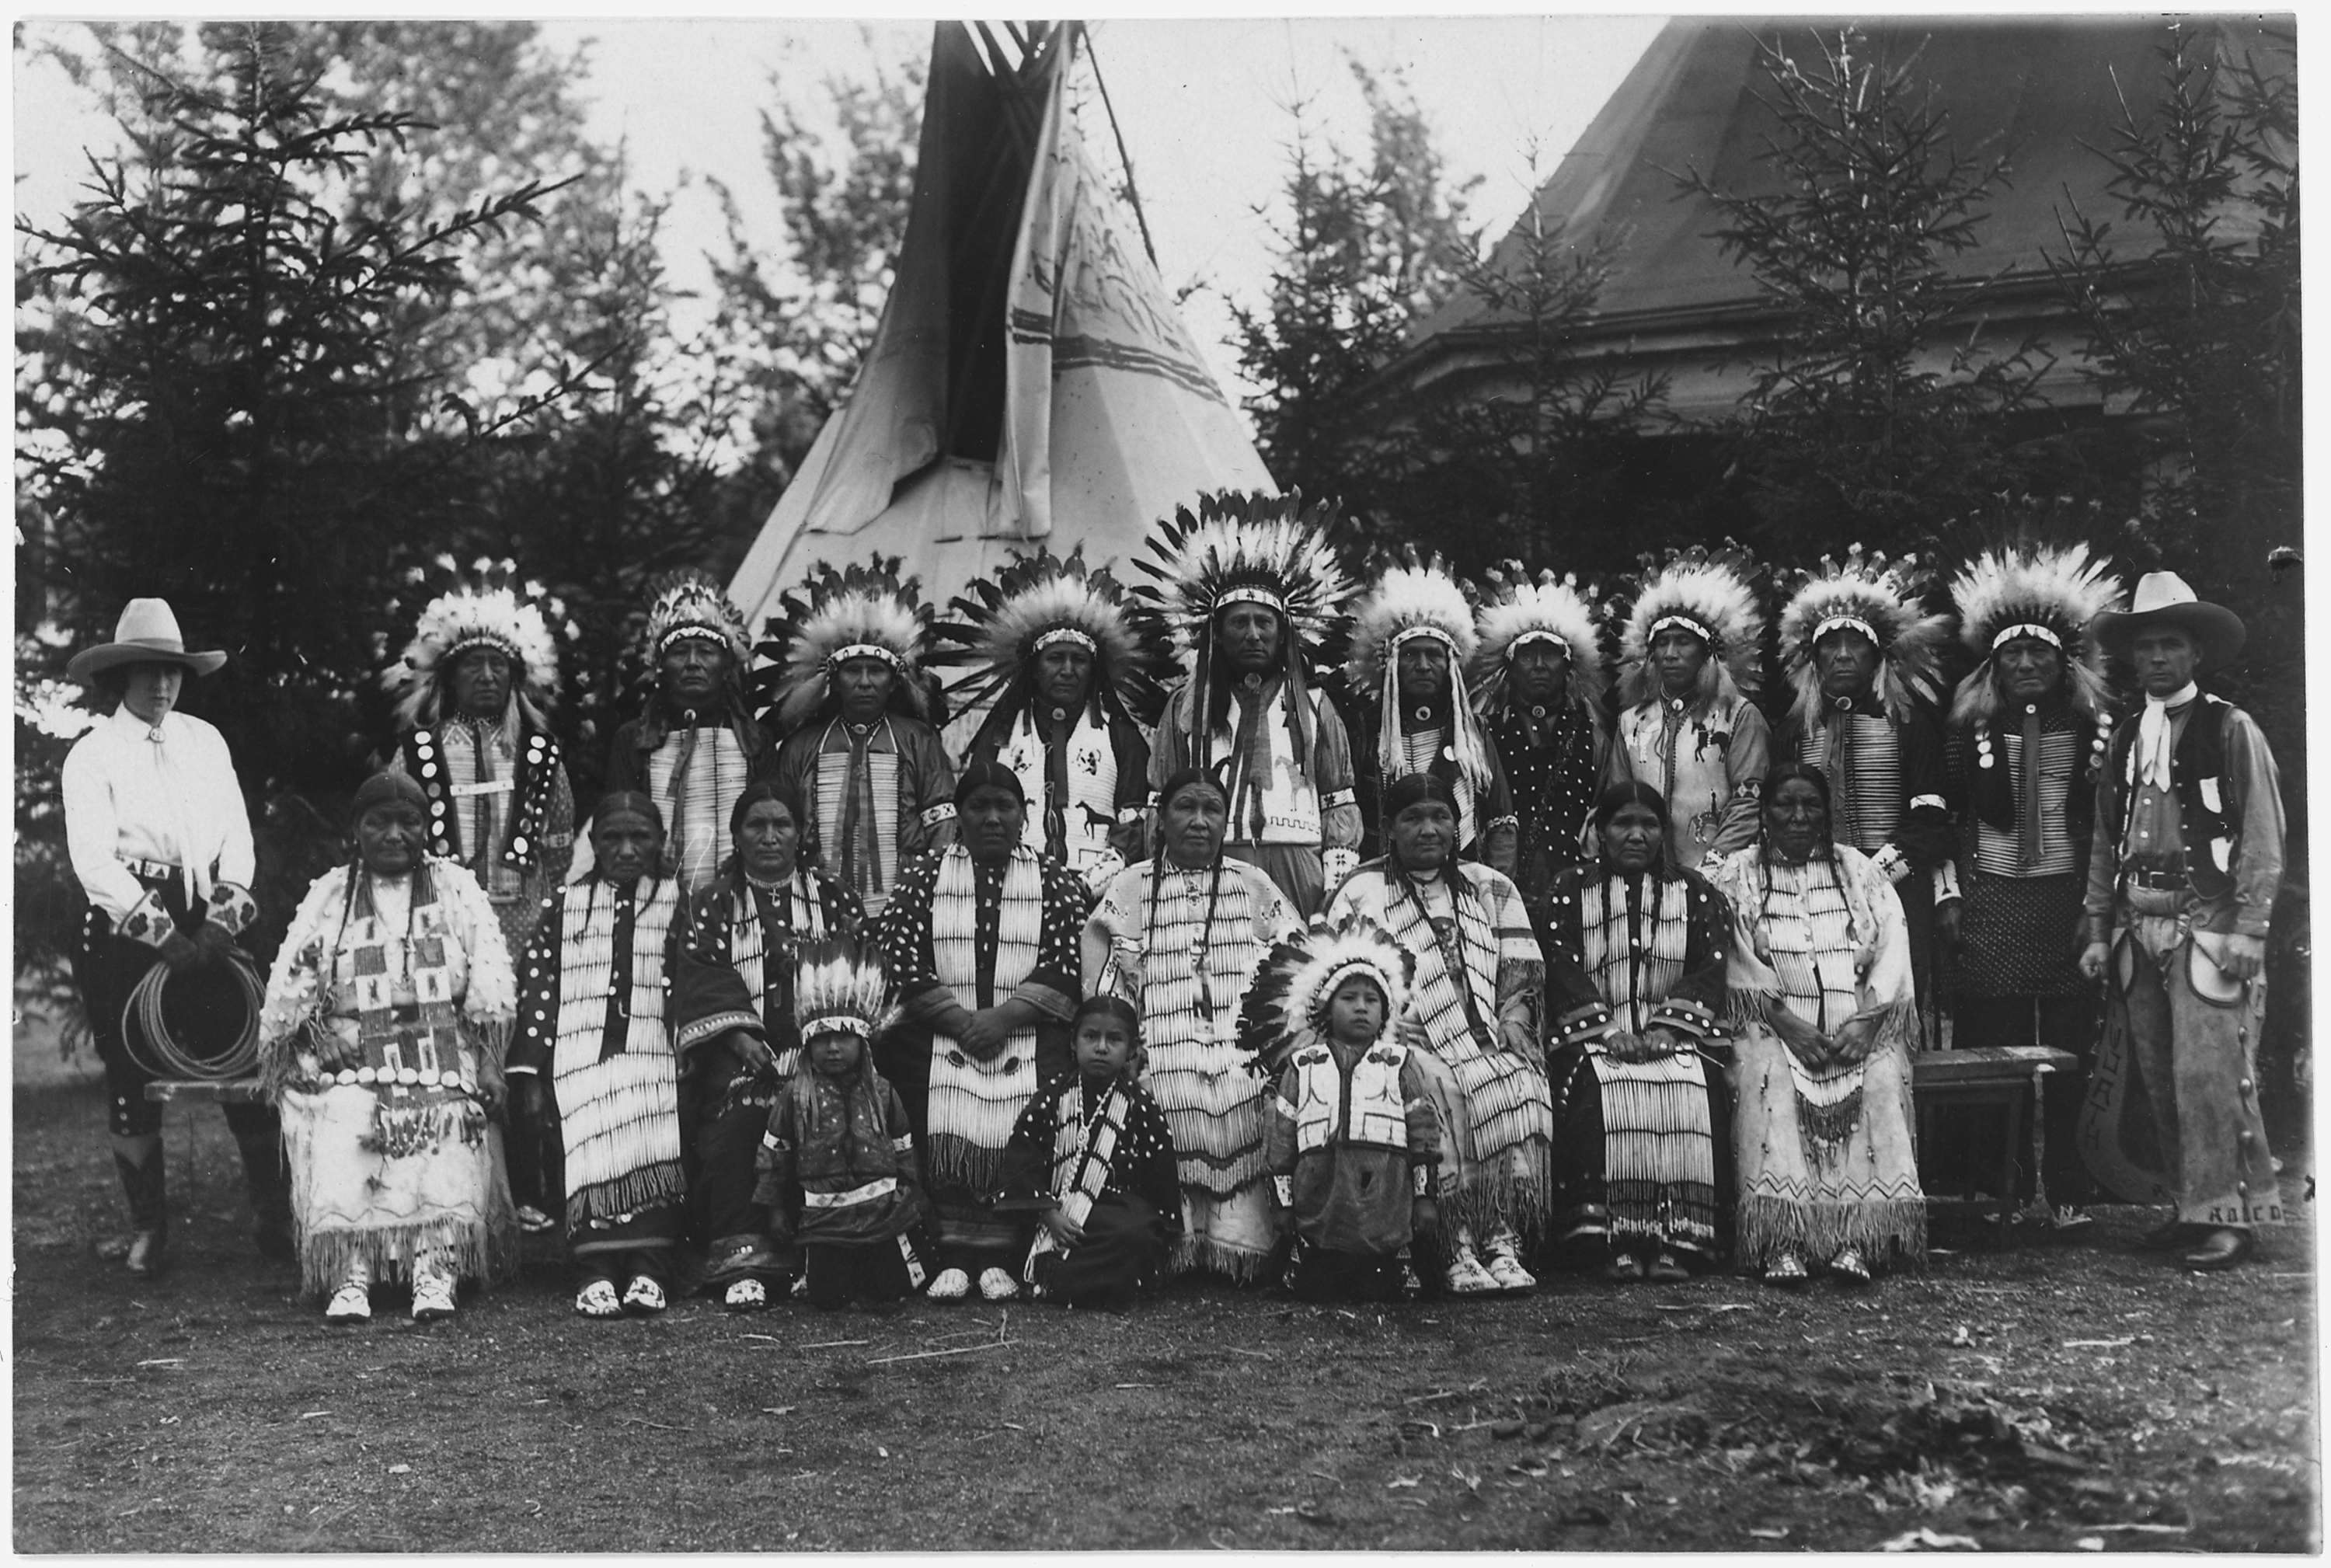 Sioux Indians in native dress on tour with Circus Sarrasani in Dresden, Germany - NARA - 285597